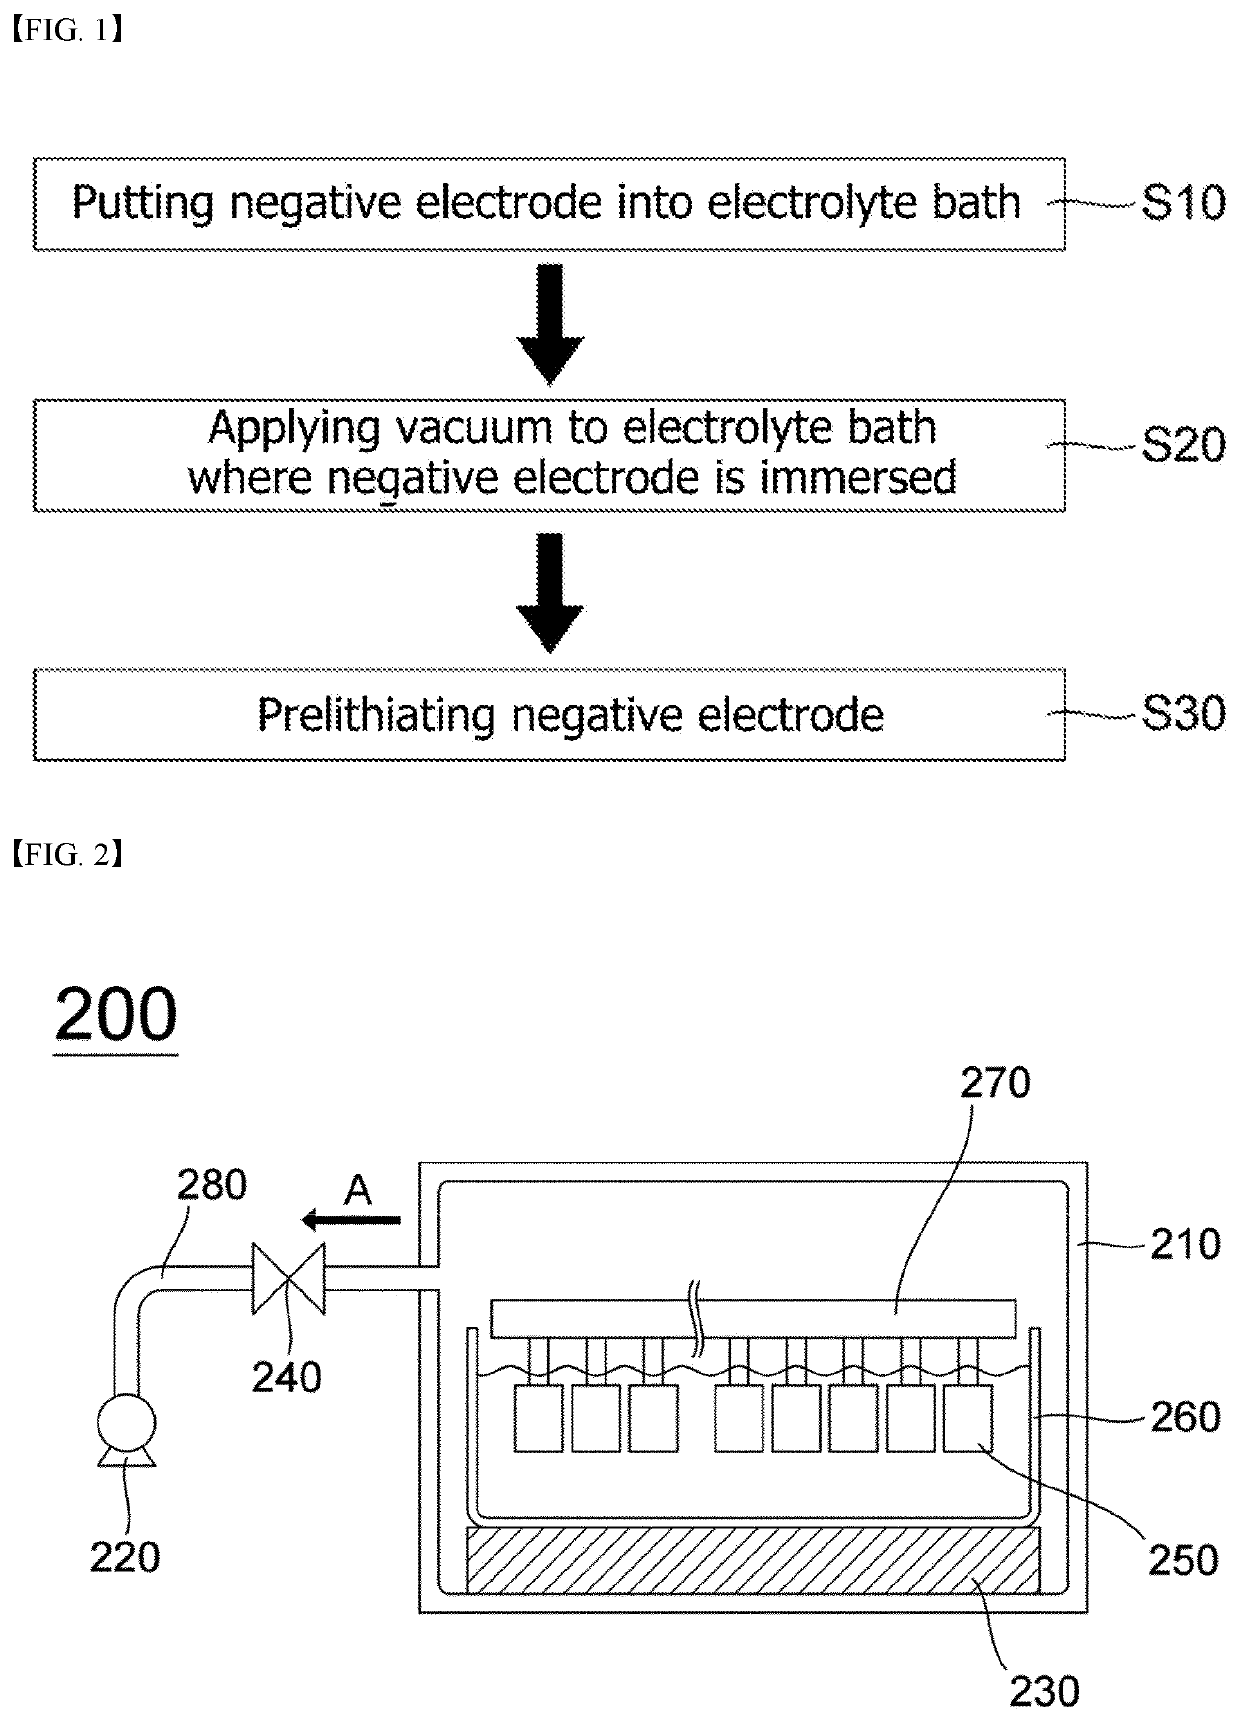 Method for pre-lithiation of negative electrode for secondary battery